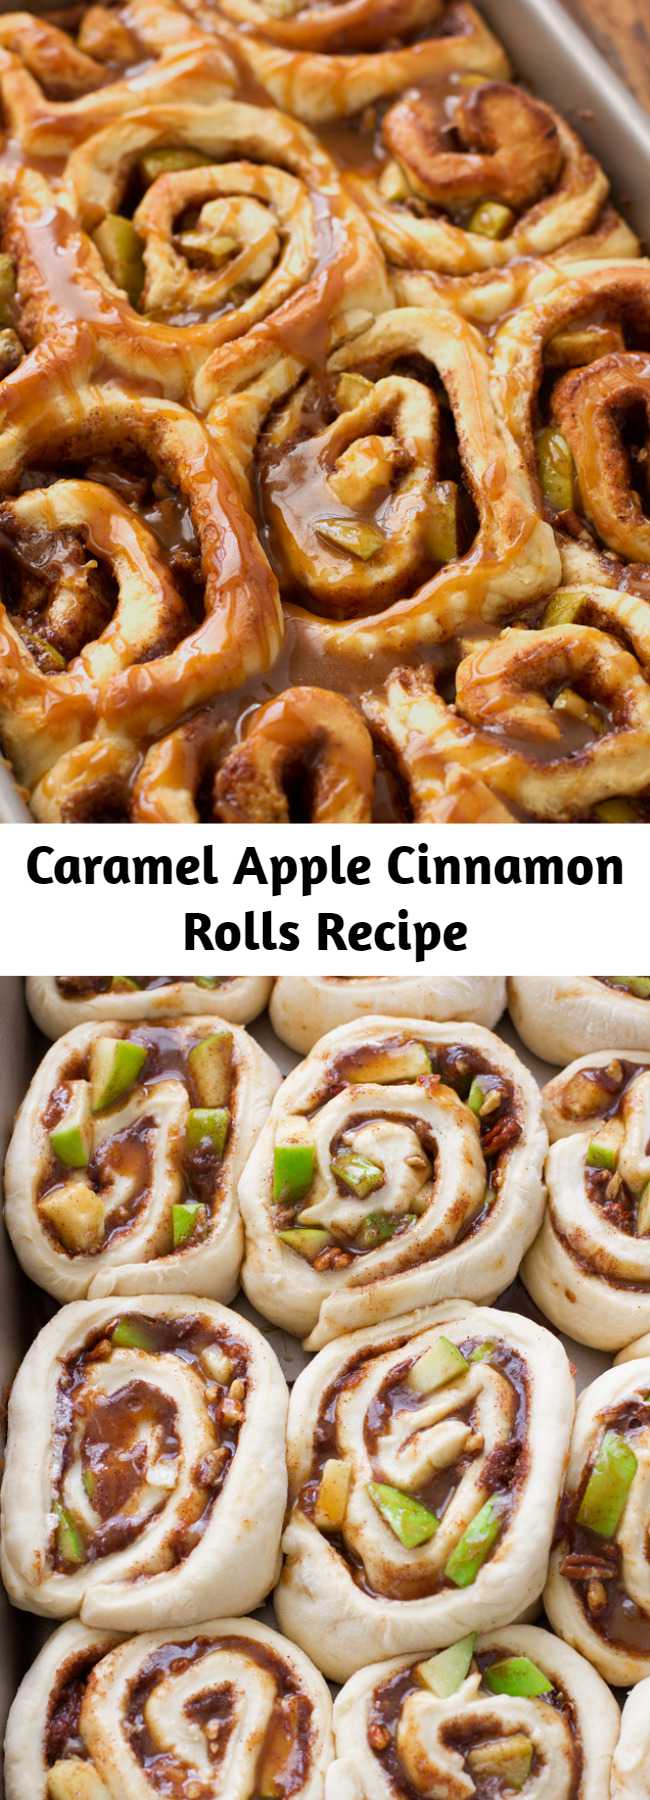 Caramel Apple Cinnamon Rolls Recipe - Caramel apple cinnamon rolls stuffed with cinnamon, brown sugar, caramel, granny-smith apples and drizzled with apple cider caramel sauce and pecans. My cinnamon rolls have the most wonderful, bakery-style buttery flavor! These apple cinnamon rolls are the perfect fall treat!